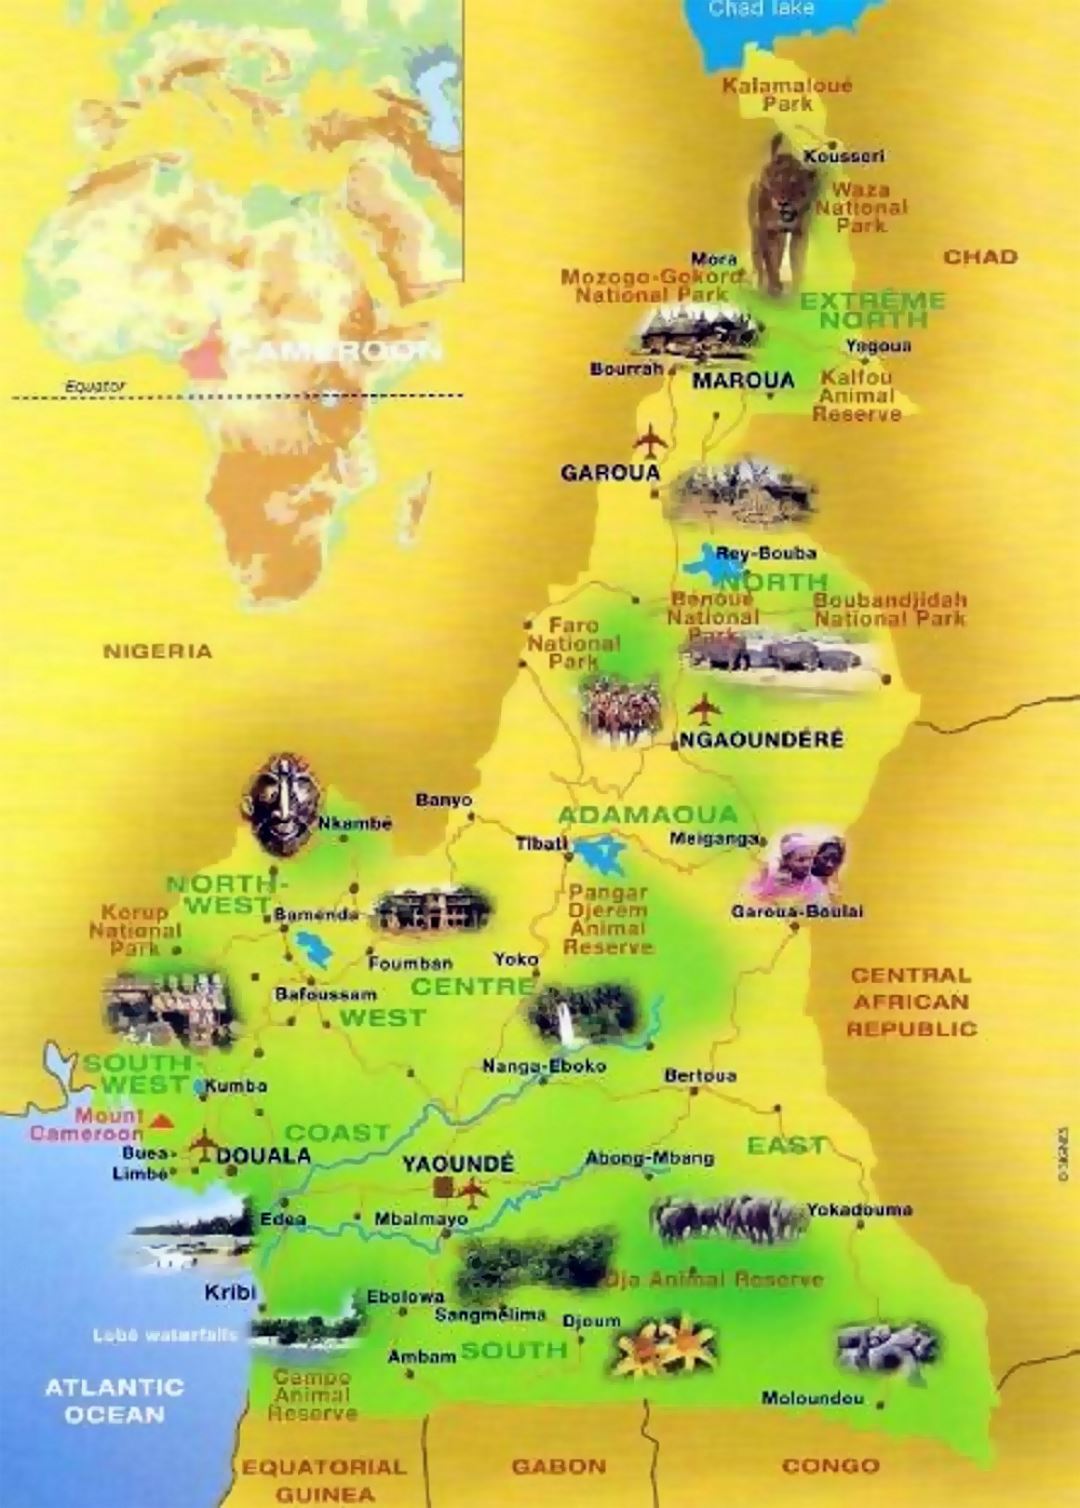 Detailed tourist map of Cameroon